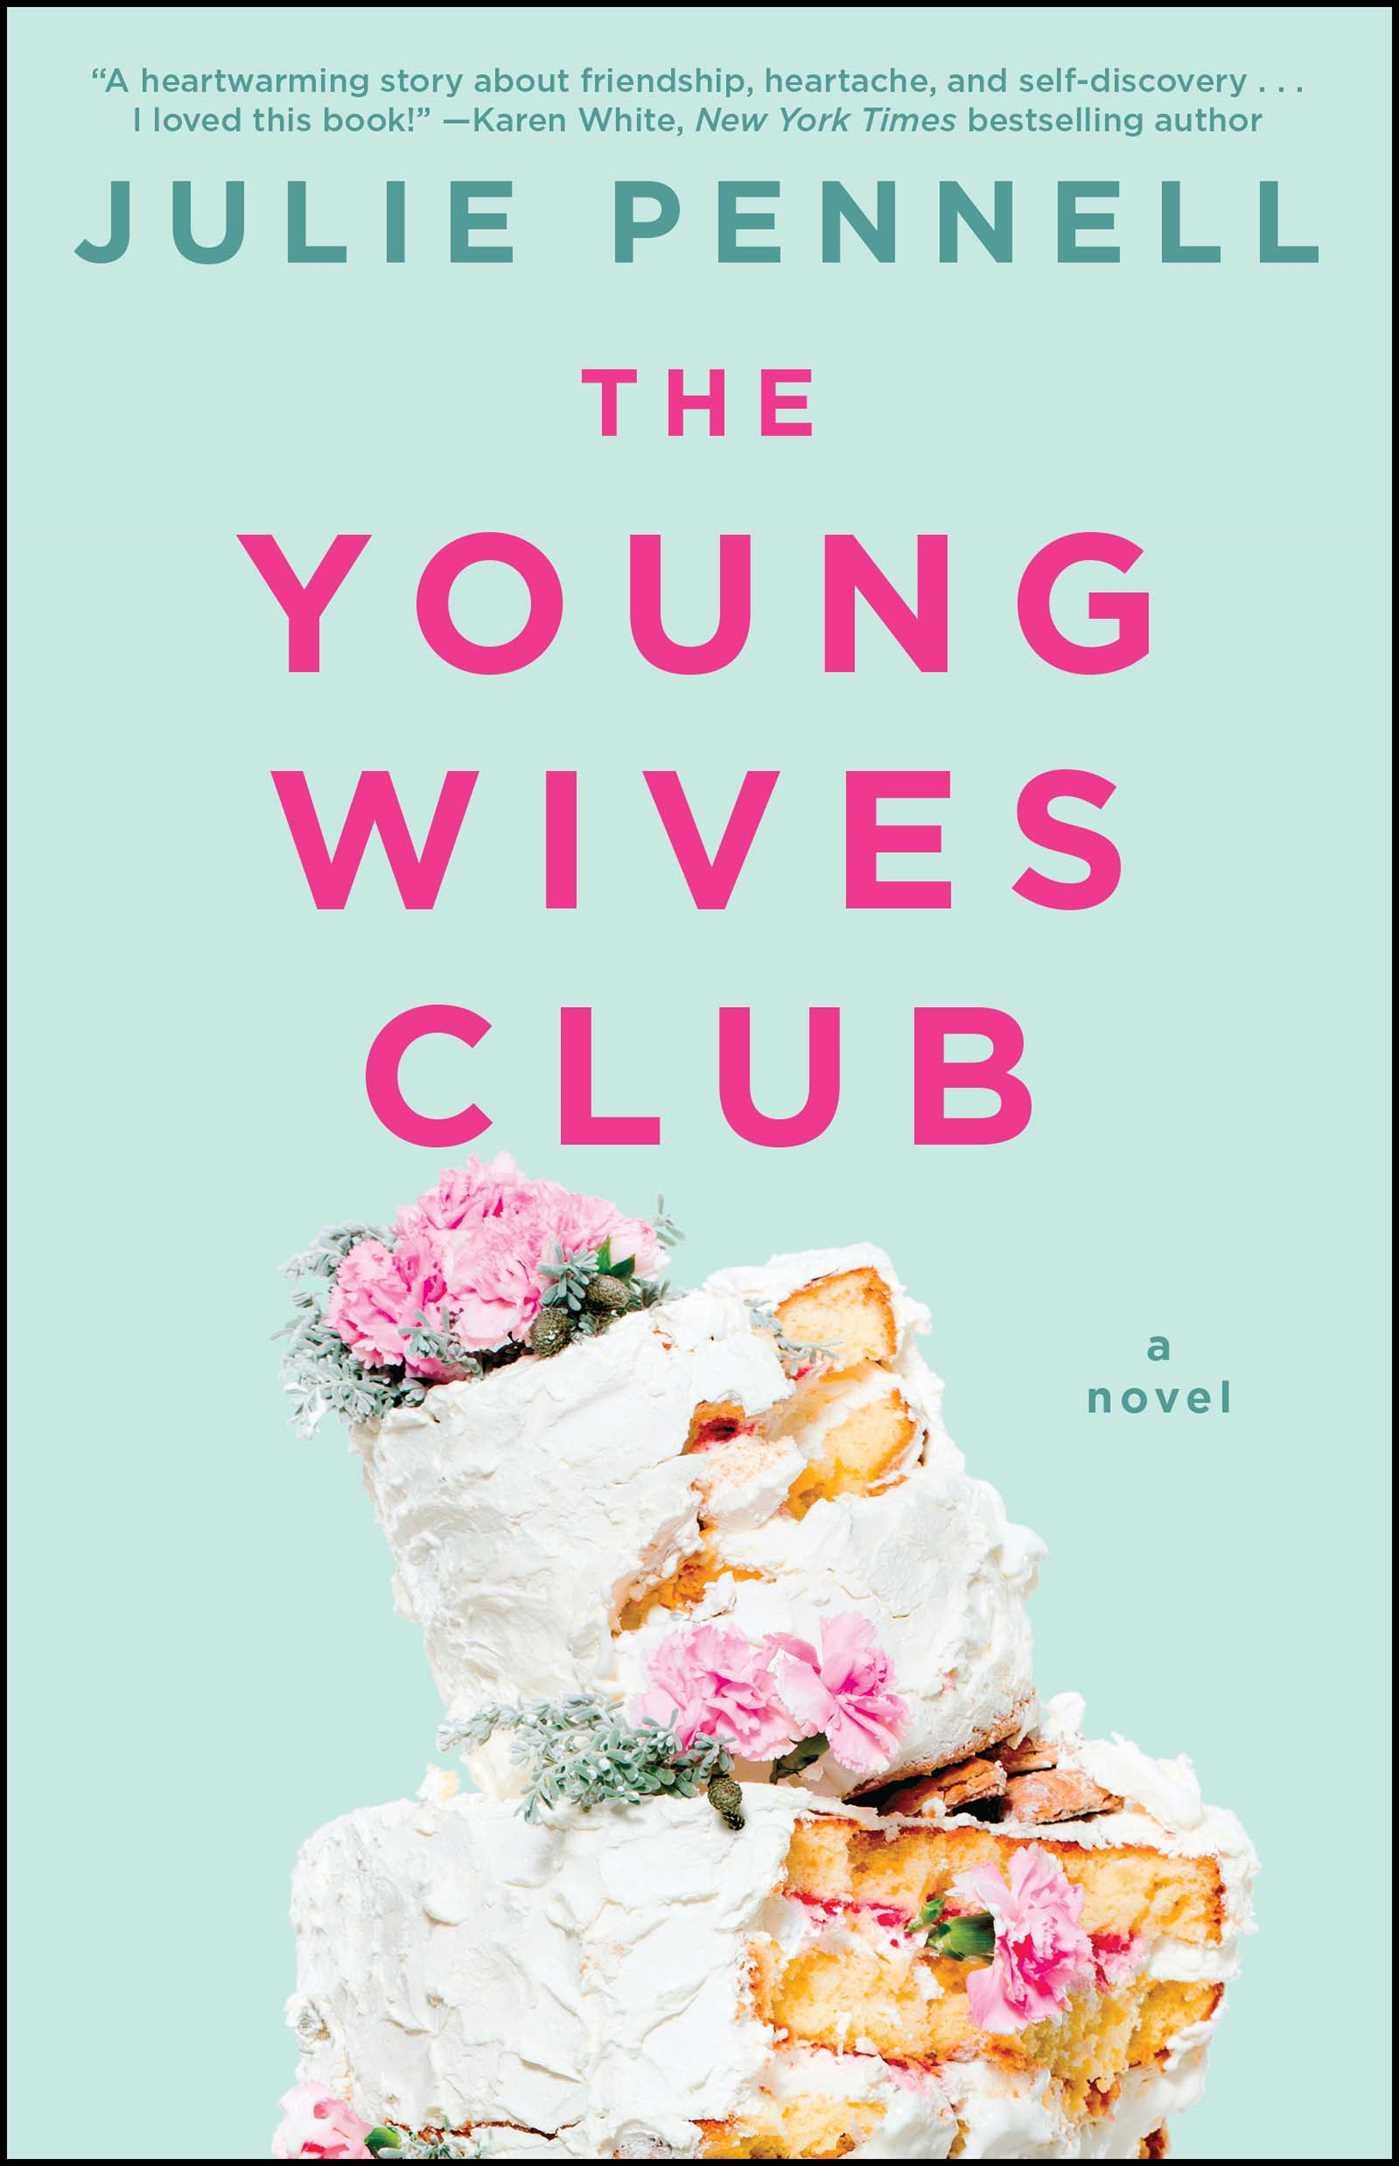 The Young Wives Club